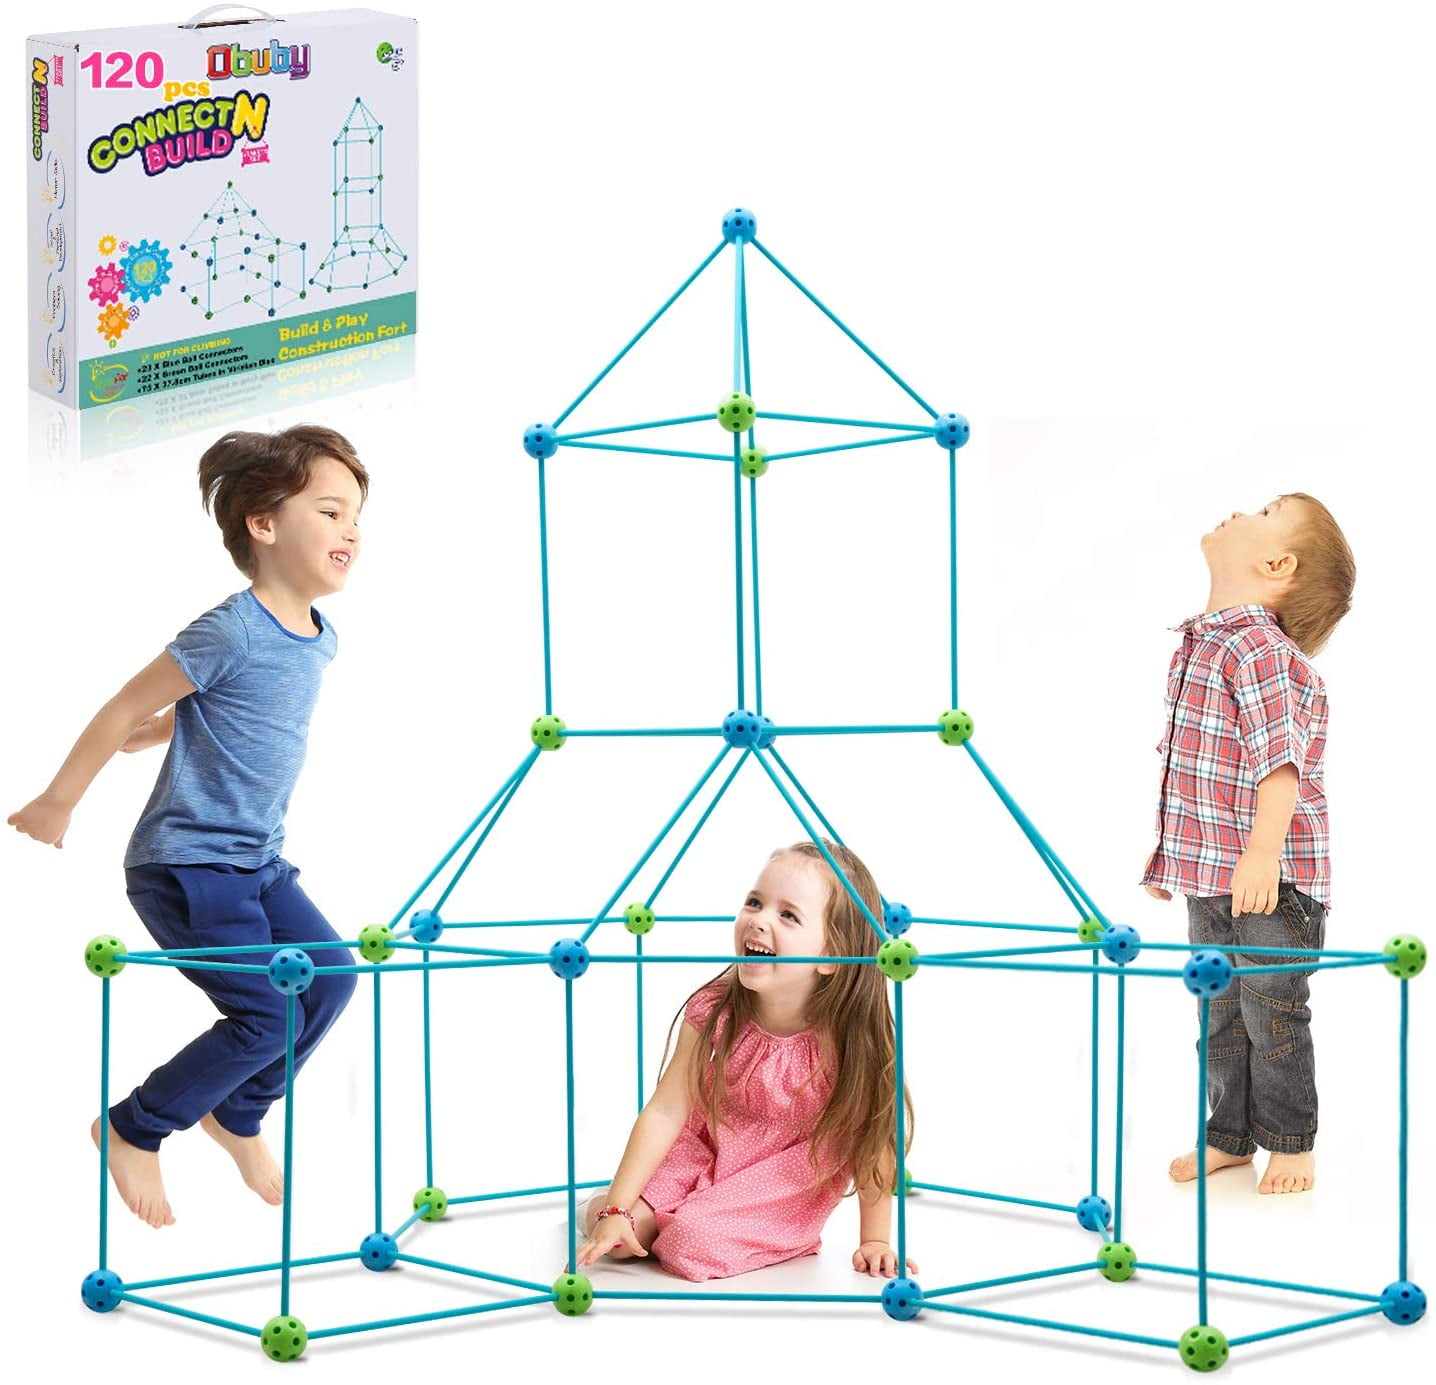 KANGABU Glow Fort Building Kit 120 Pieces STEM Learning Playhouse for Kids Outdoor Building Toys for 5 6 7 8 9 10 Year Old Boys Girls Glow in The Dark 